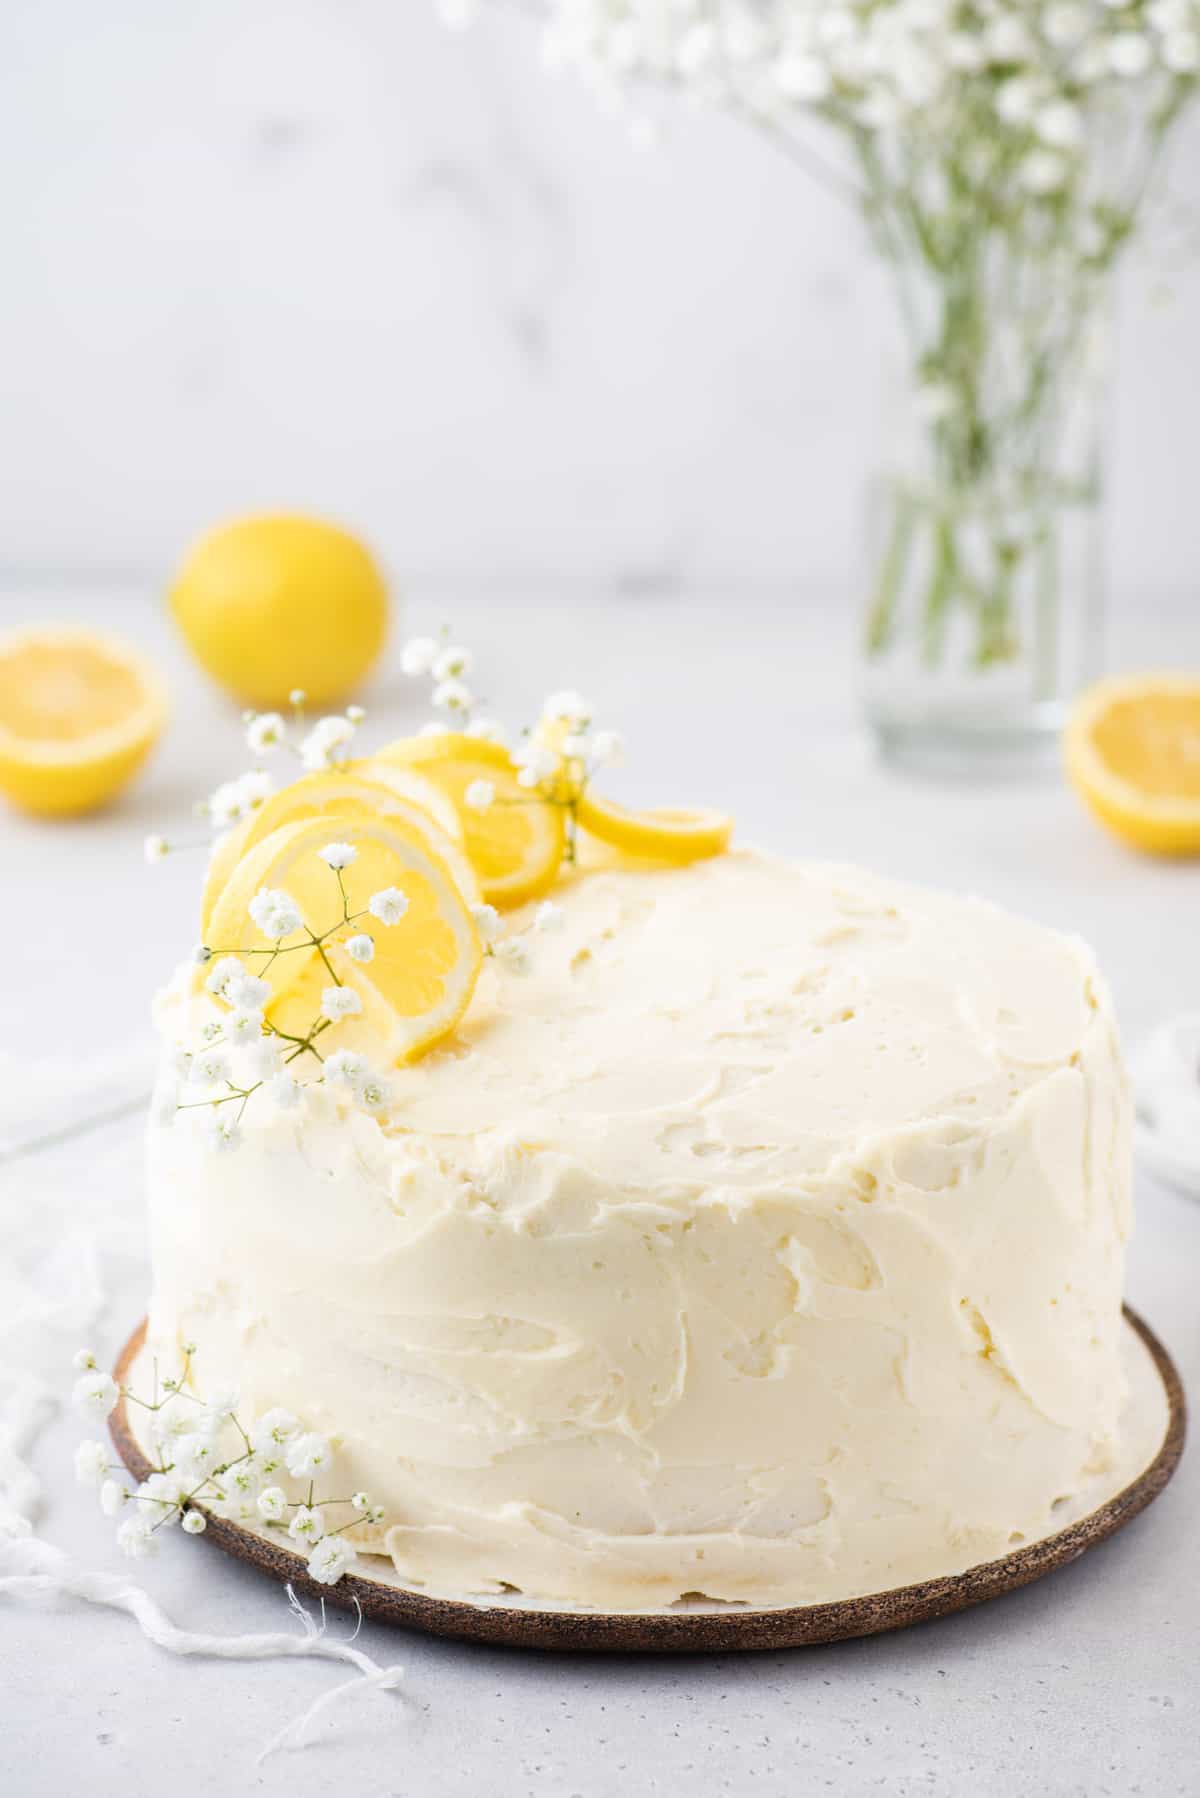 Whole lemon cake on plate, with baby's breath and lemon slices as garnish